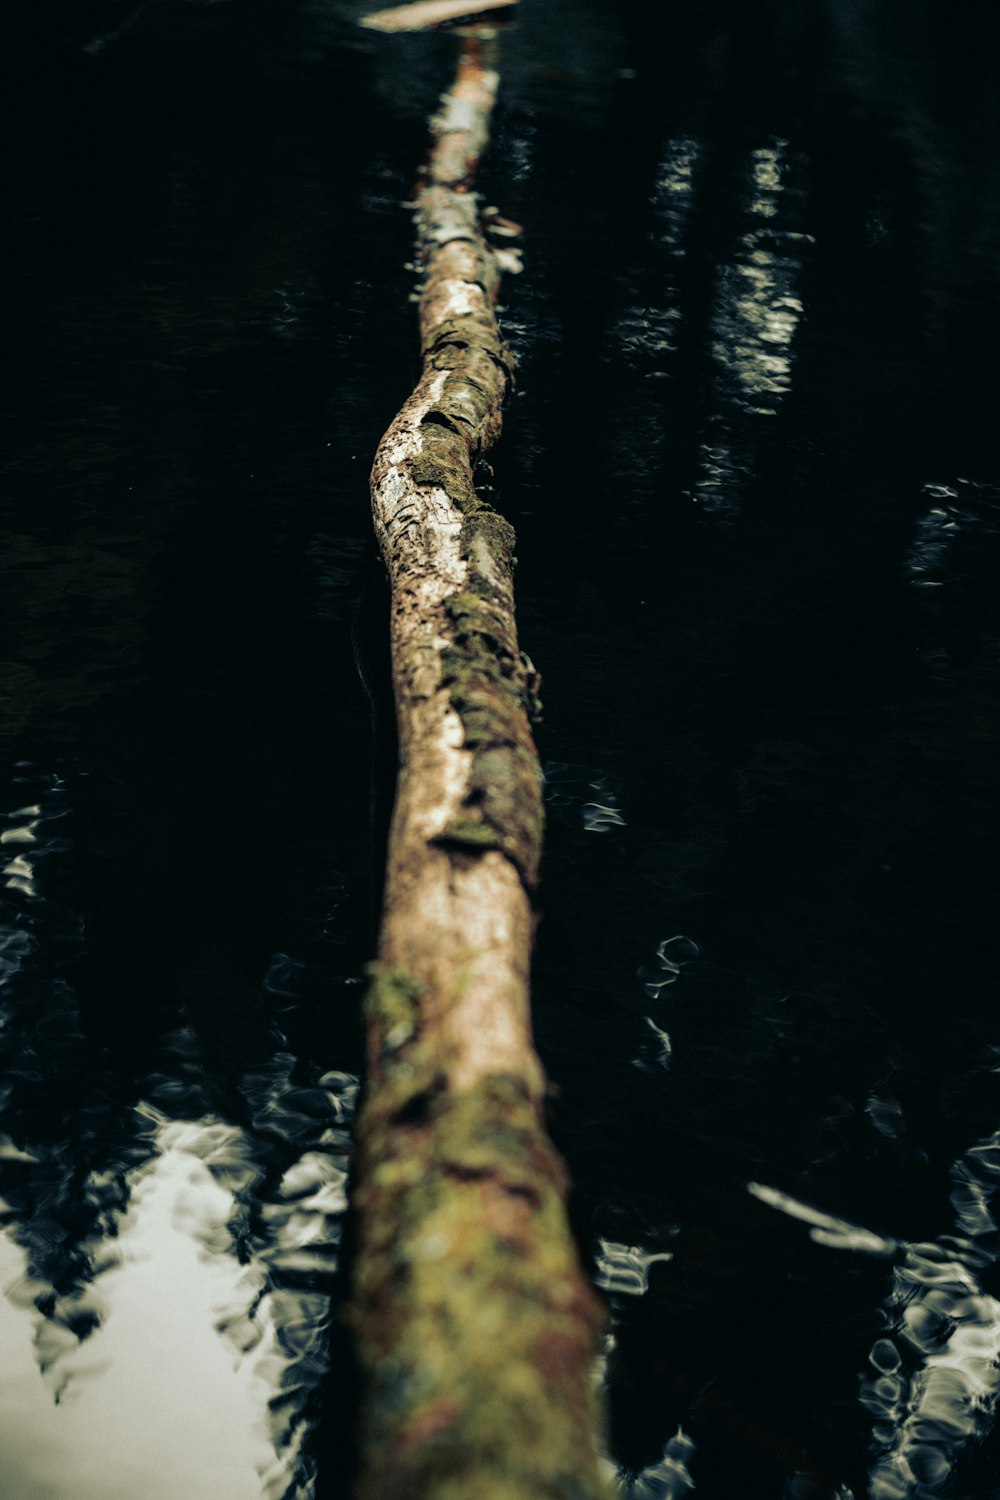 a log in a body of water